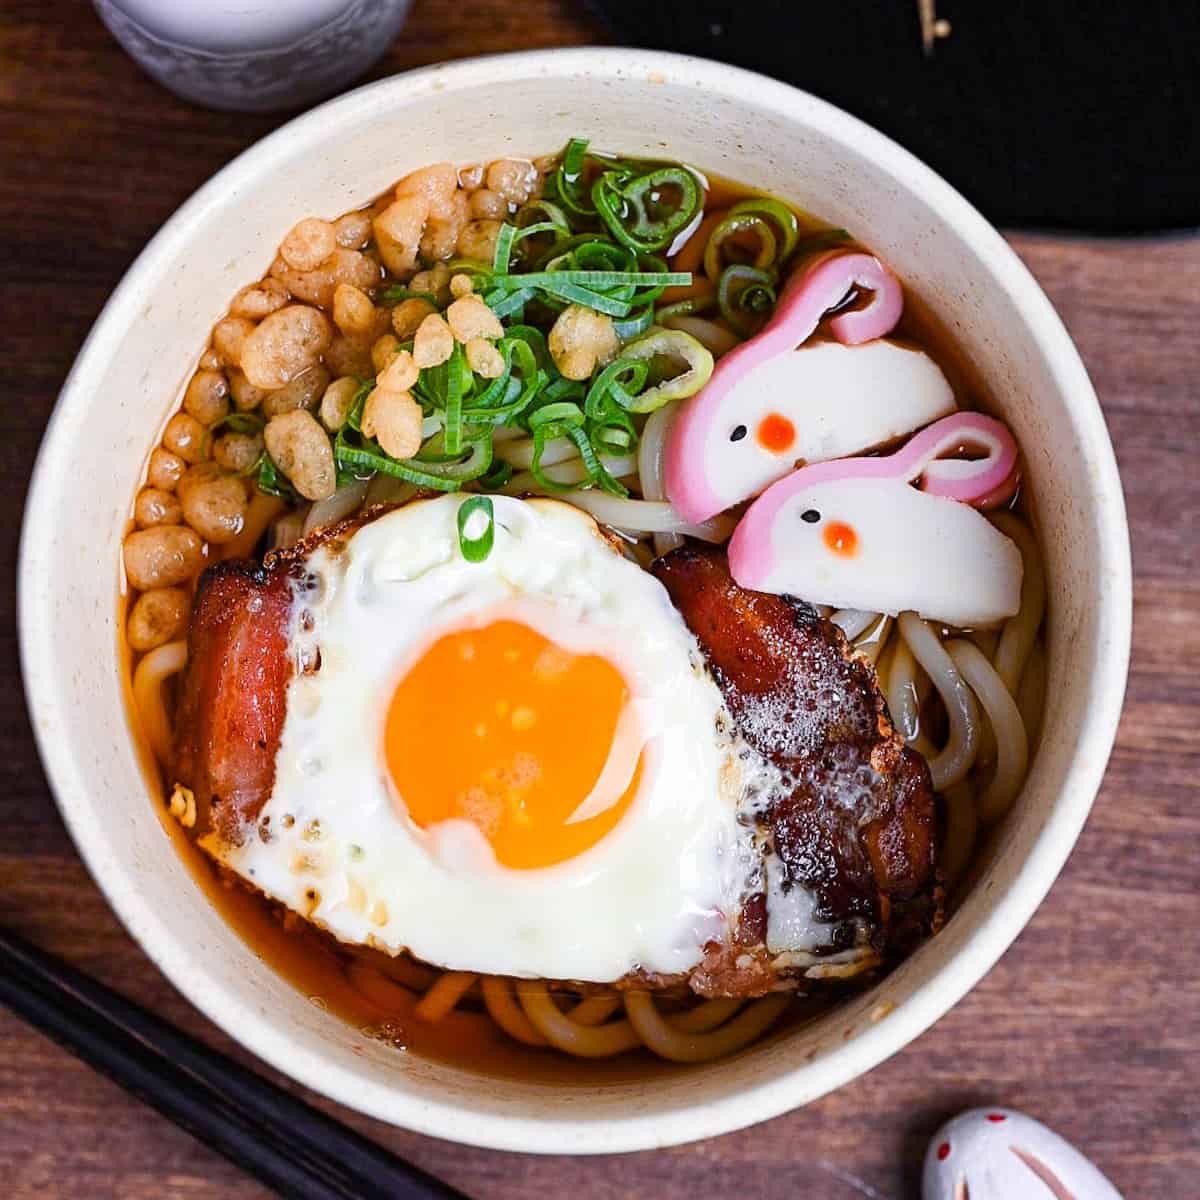 Tsukimi udon made with thick noodles in a dashi broth topped with eggs, bacon, green onion, tempura bits and kamaboko fishcake shaped into a rabbit